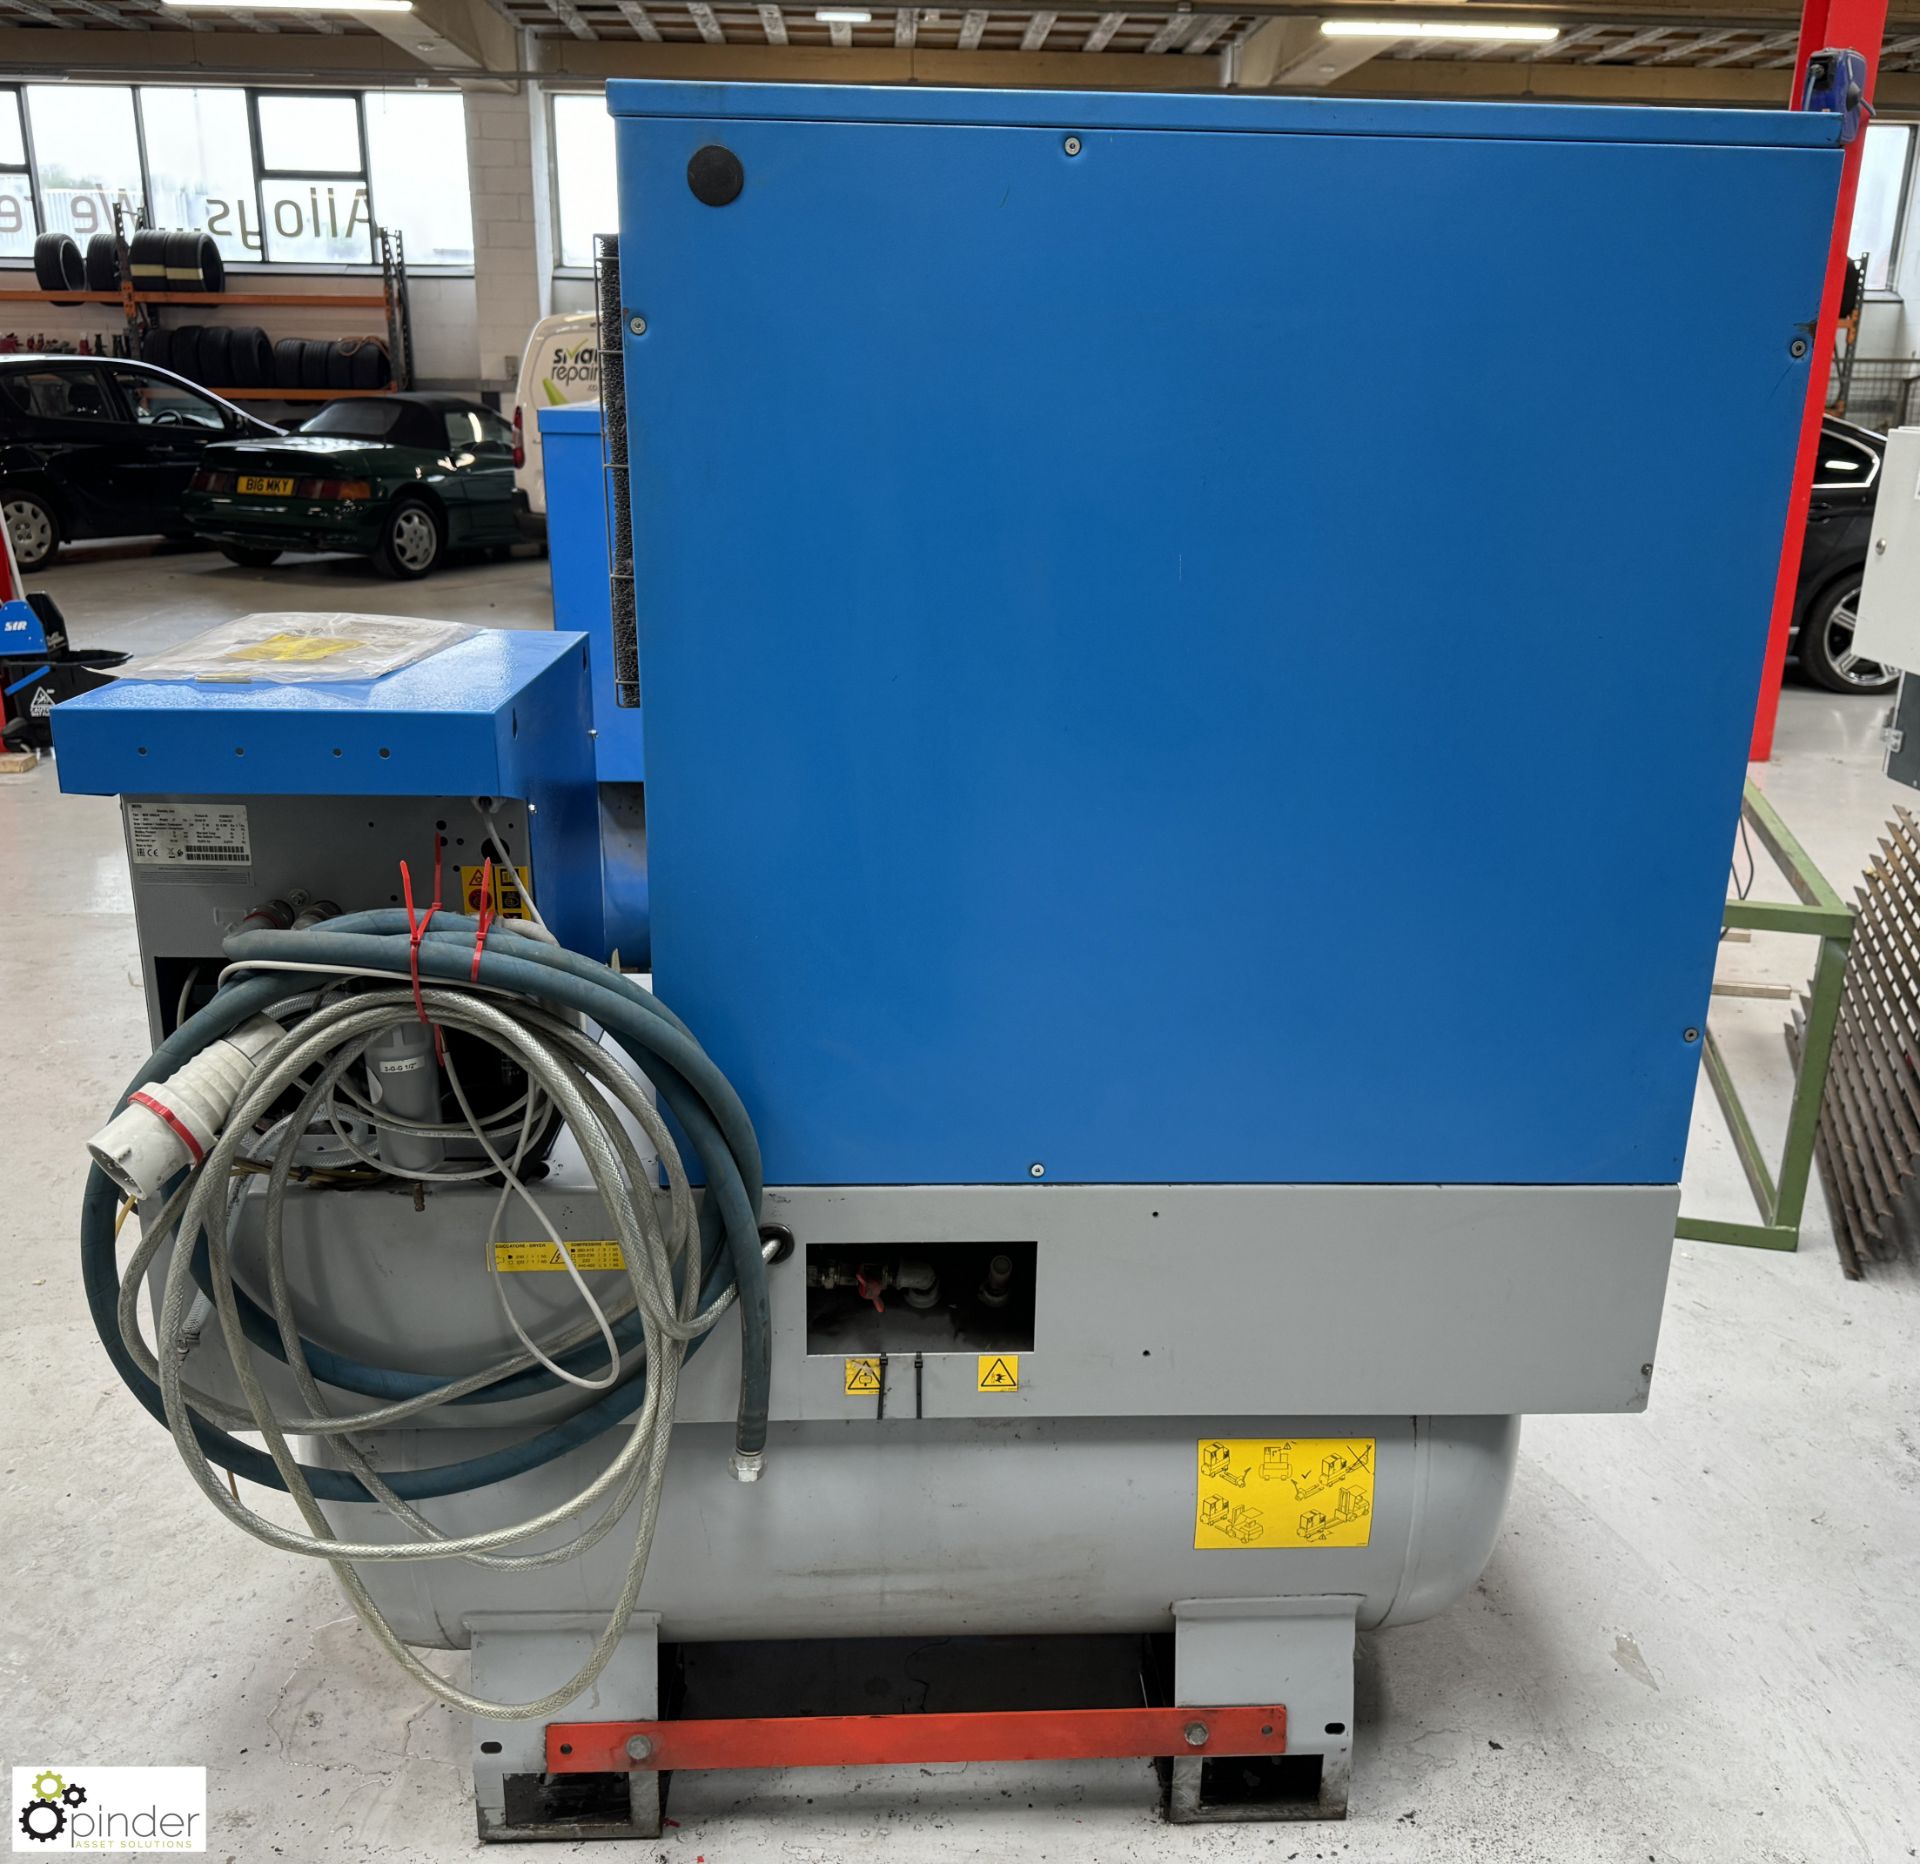 Mark MAXP15/10 receiver mounted Packaged Rotary Screw Compressor, max pressure 10bar, 415volts, - Image 8 of 12